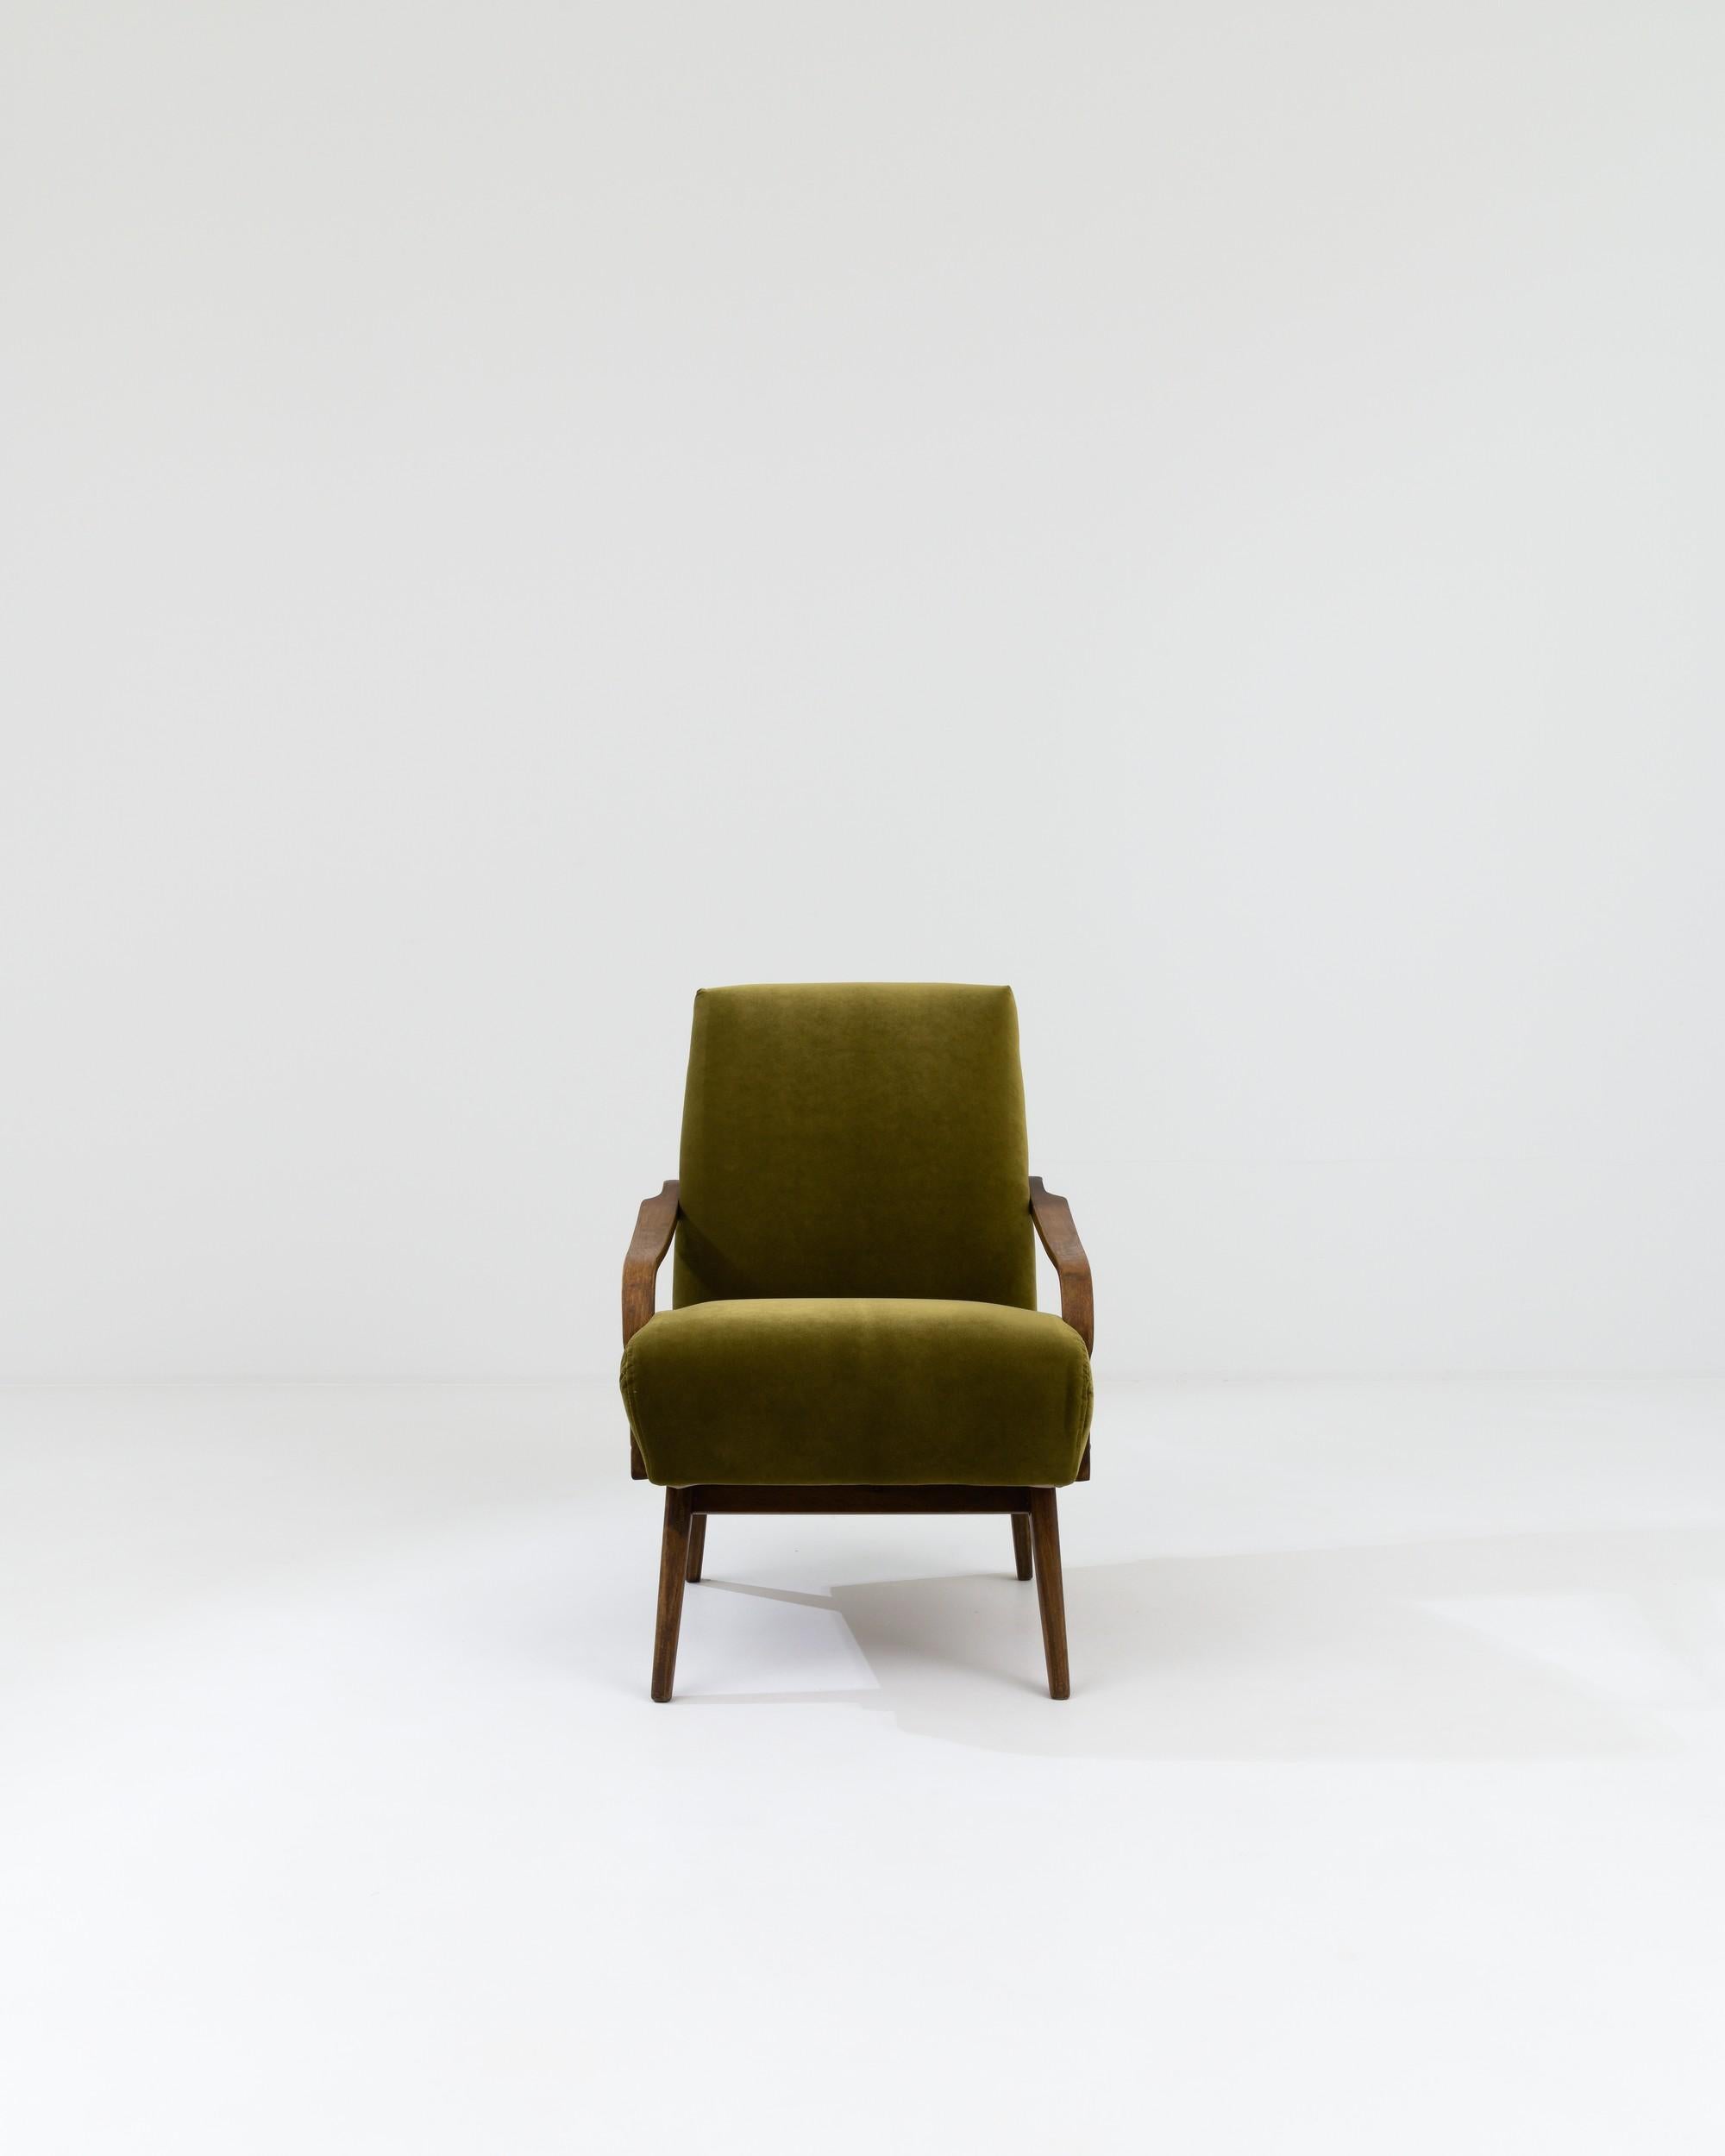 A wooden upholstered armchair created in 1960s Czechia. Characteristic of mid-century modern Czech design, this suave, high-backed armchair imparts a soothing sense of relaxation through understated and delicately executed craftsmanship. Carefully